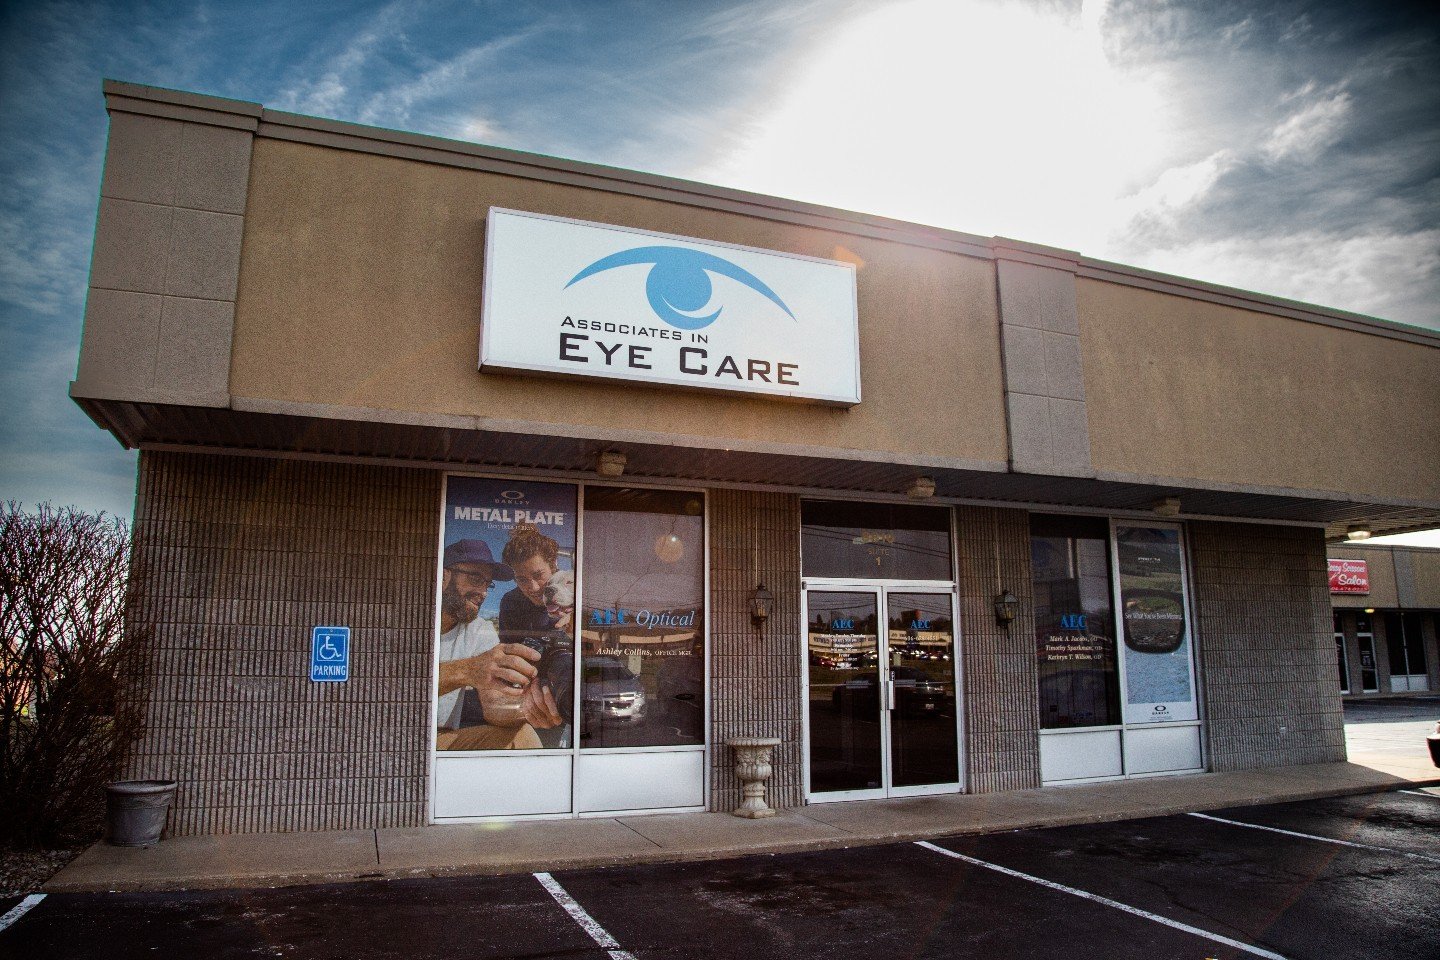 Love to help others and work with people who care? Associates In Eye Care is seeking a full-time Optical Tech/Tester to assist with patient care and eye exams in Somerset, KY! Resumes can be sent to the AEC Somerset Office Manager Robbie Spradlin at 